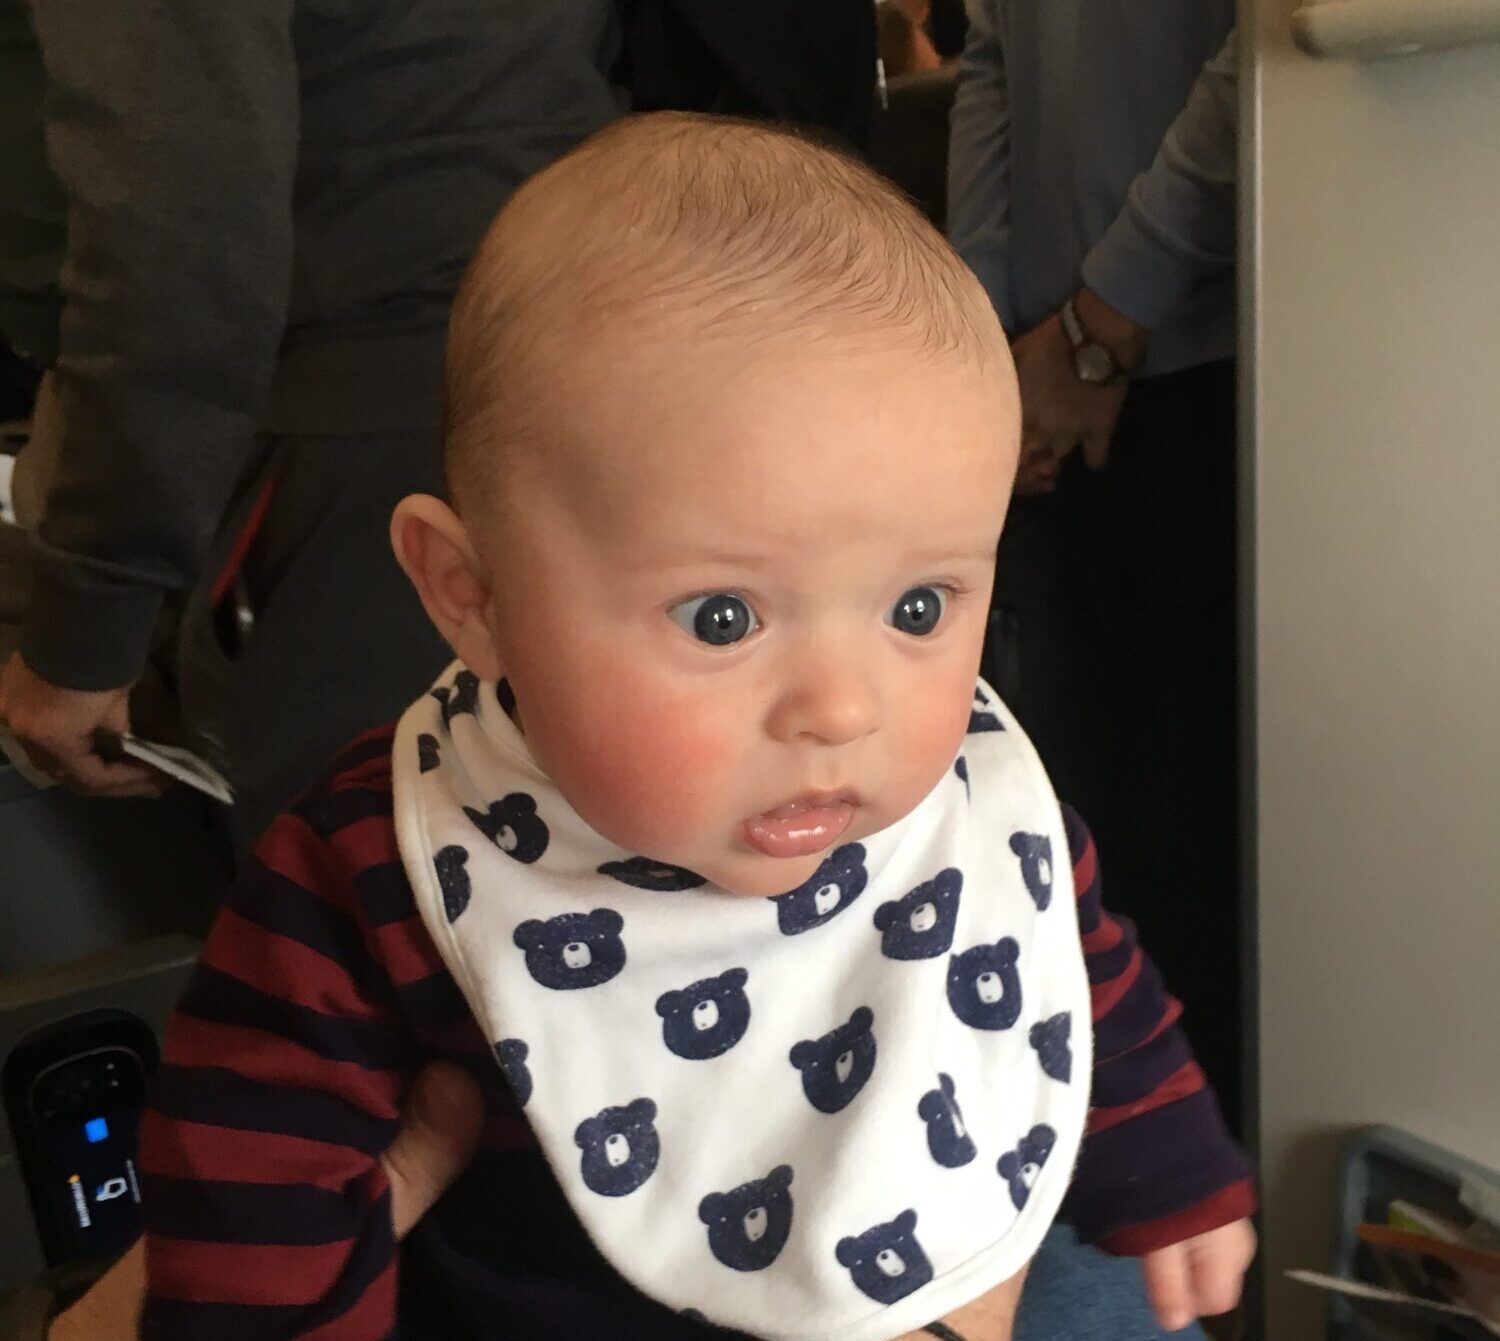 WHAT IT'S REALLY LIKE FLYING WITH A BABY